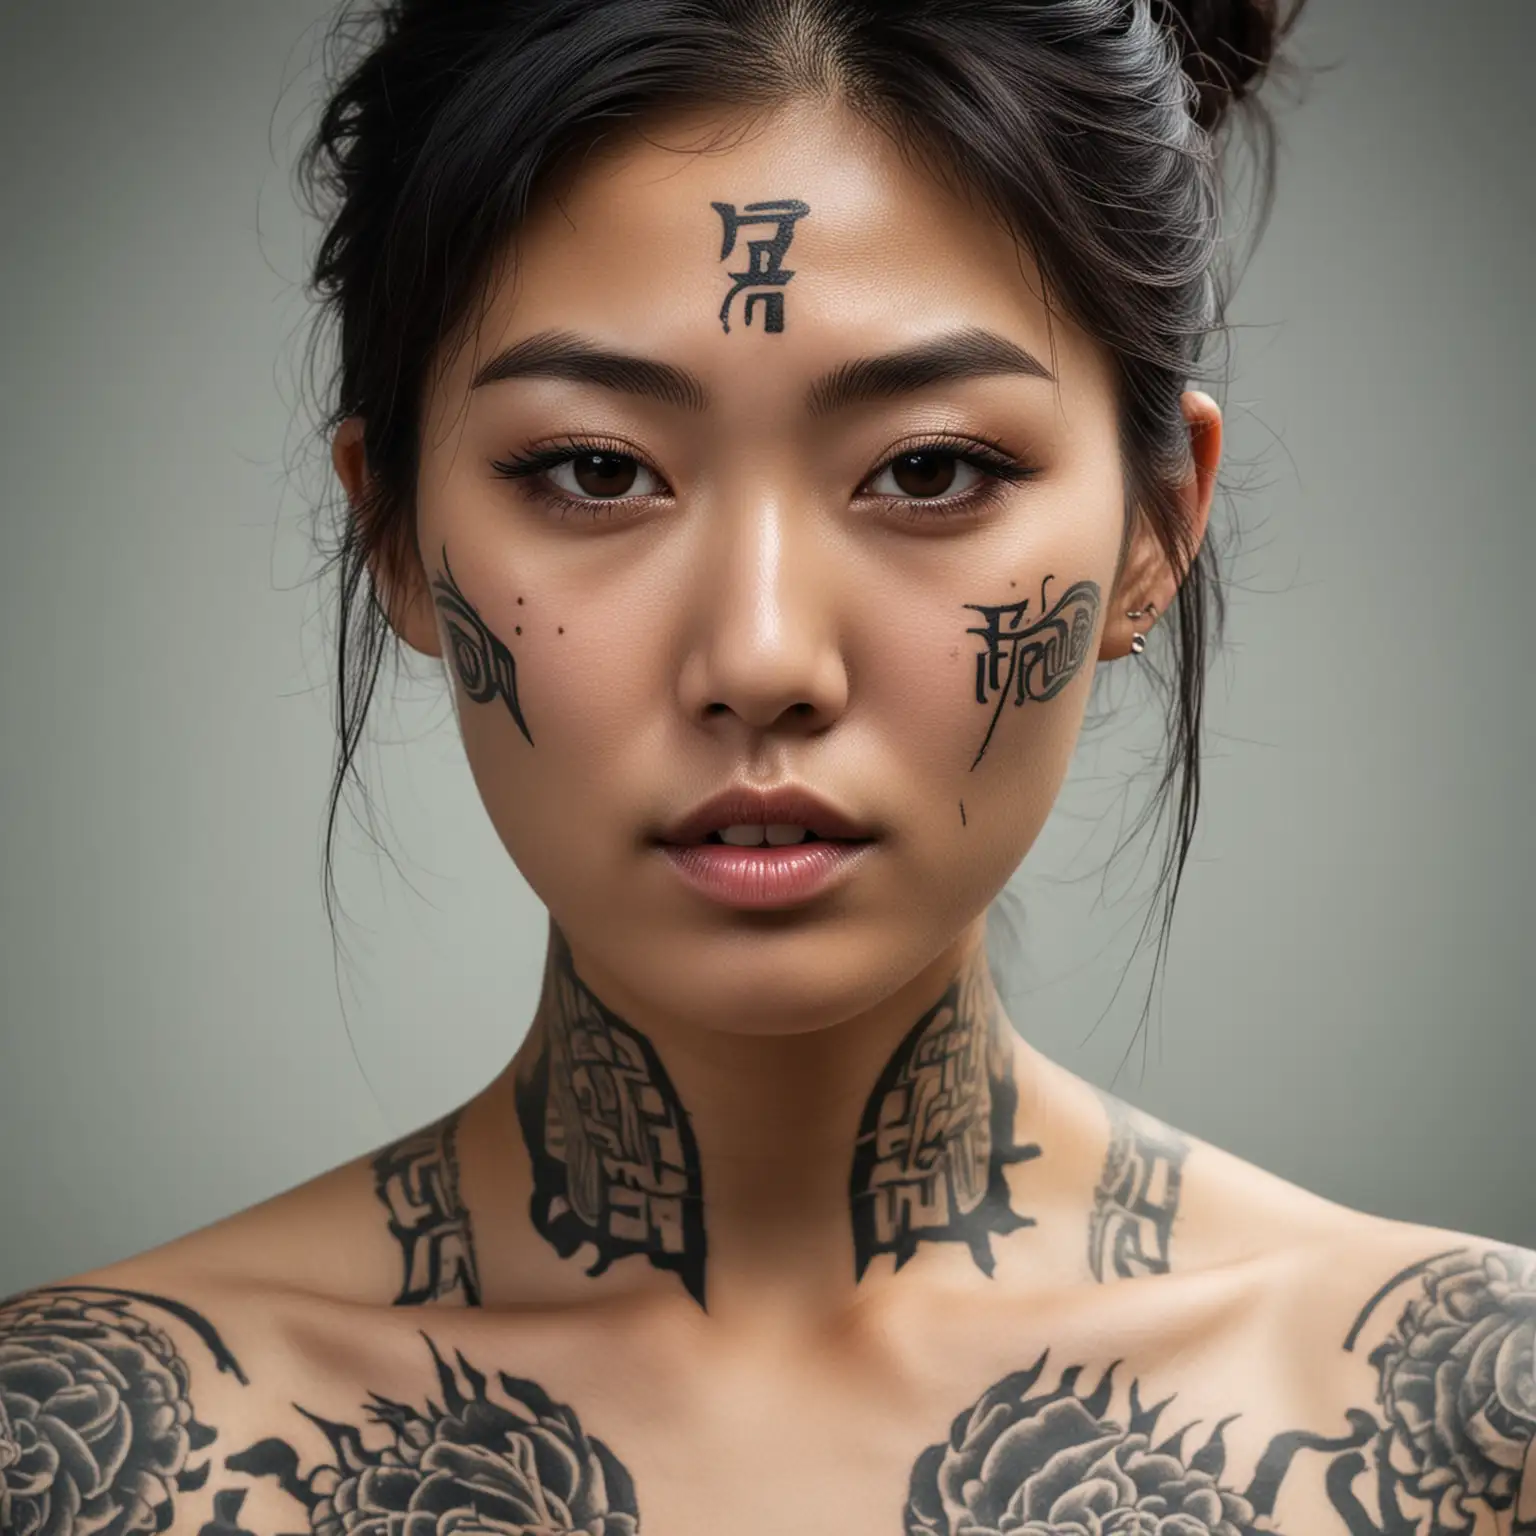 Korean woman with a strong fierce look. She has face tattoos